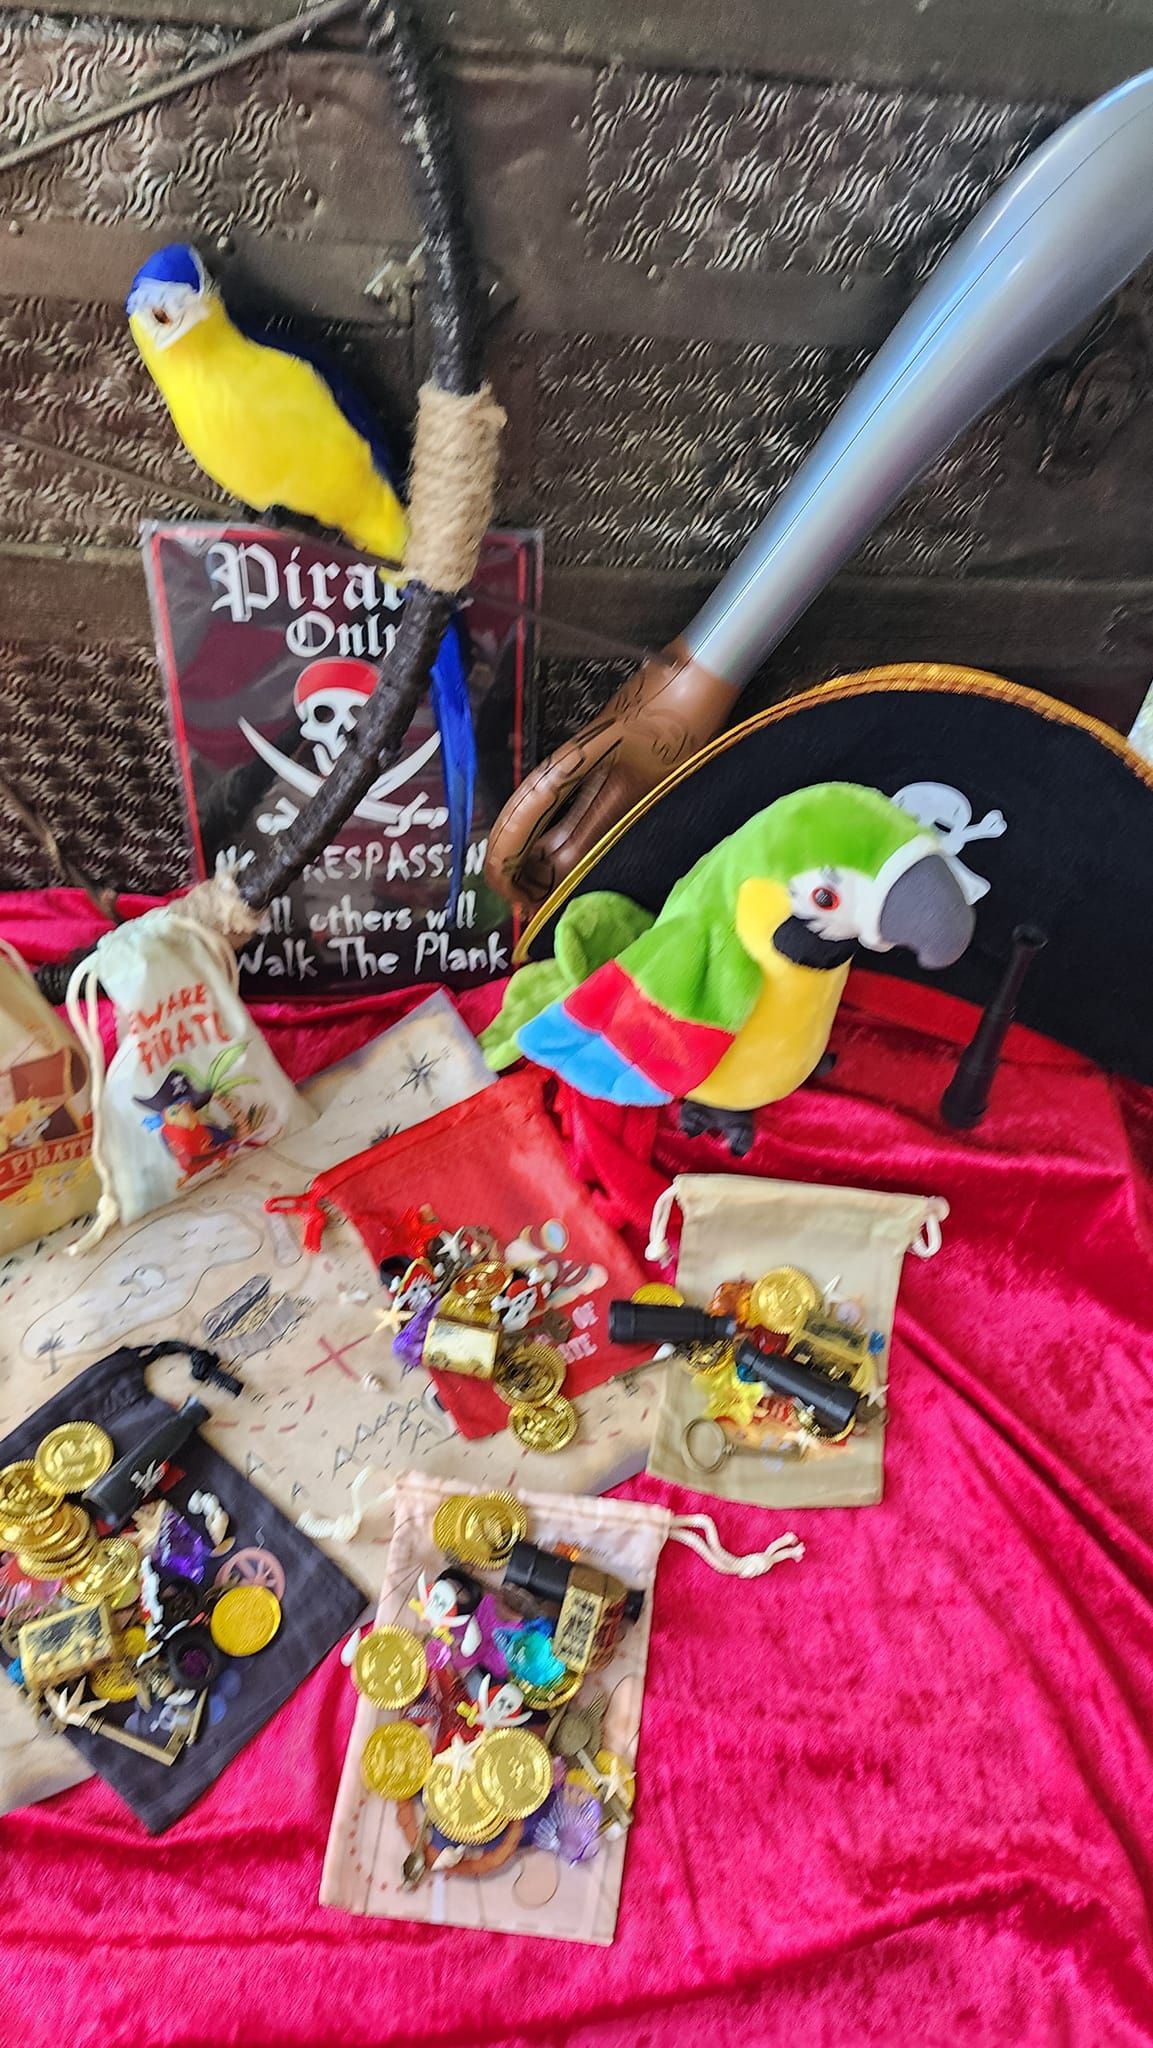 Interactive Pirate Story & Treasure Hunt - Read comment about coupon code